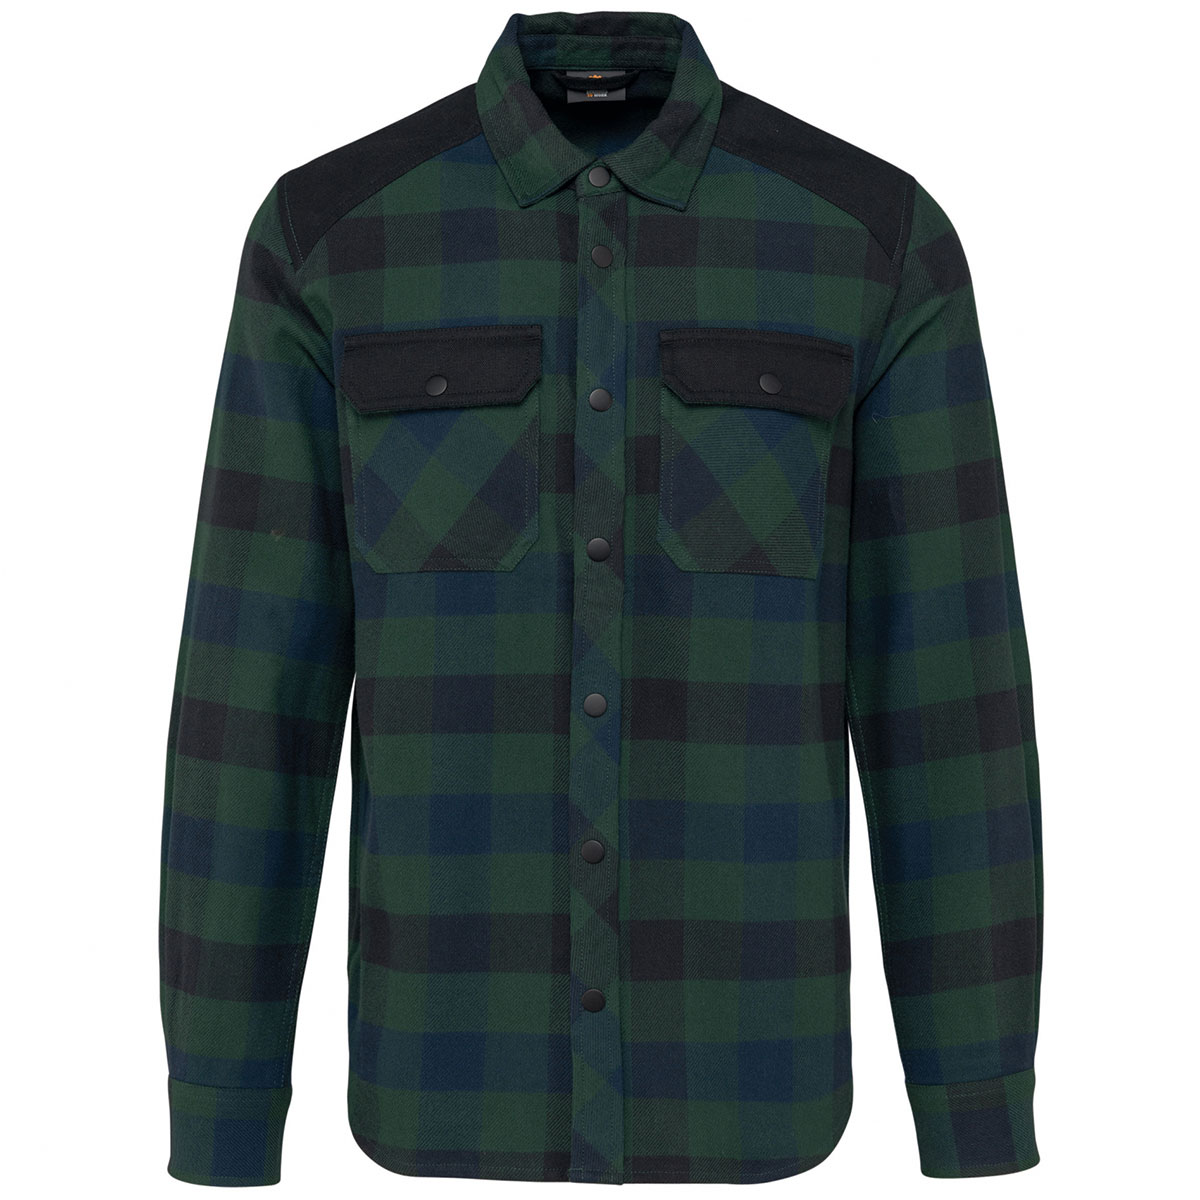 Forest green/ navy checked/ black